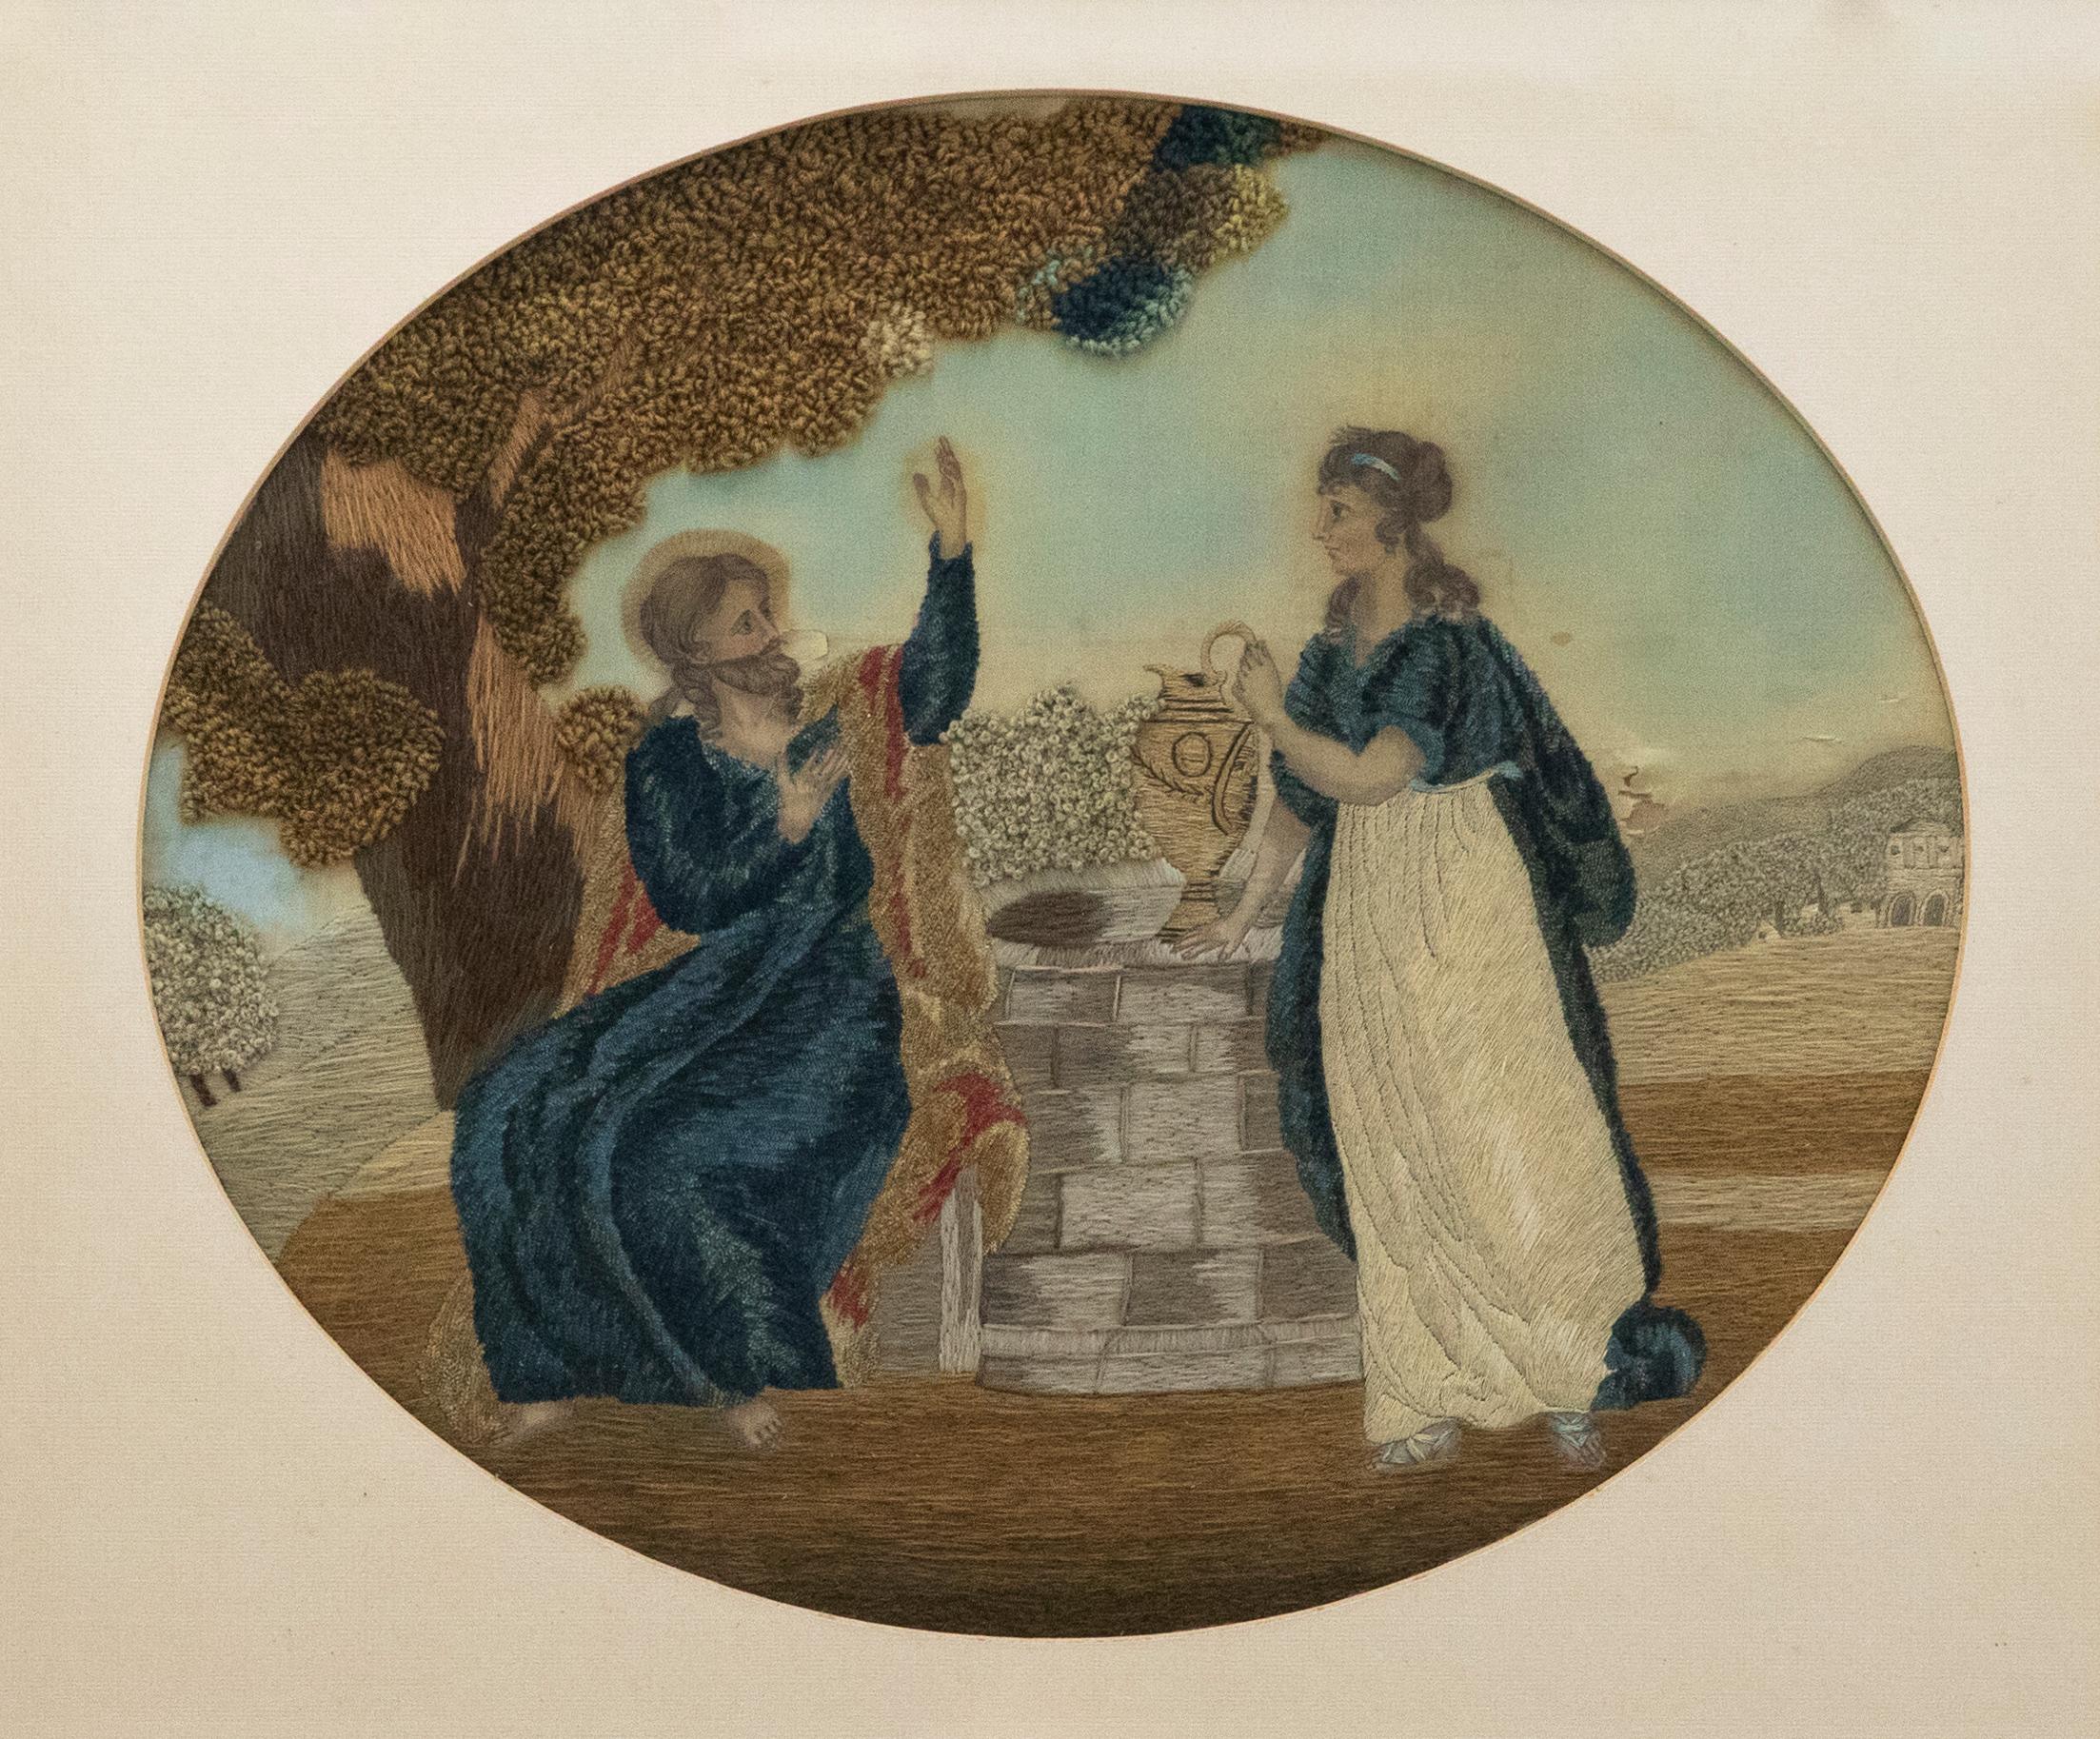 A well crafted 19th century needlework on silk, depicting the Story of Jesus and the Samaritan Woman at the Well. Composed from wool and silk yarn and finished with watercolour. The religious scene has been well presented in an elegant hardwood